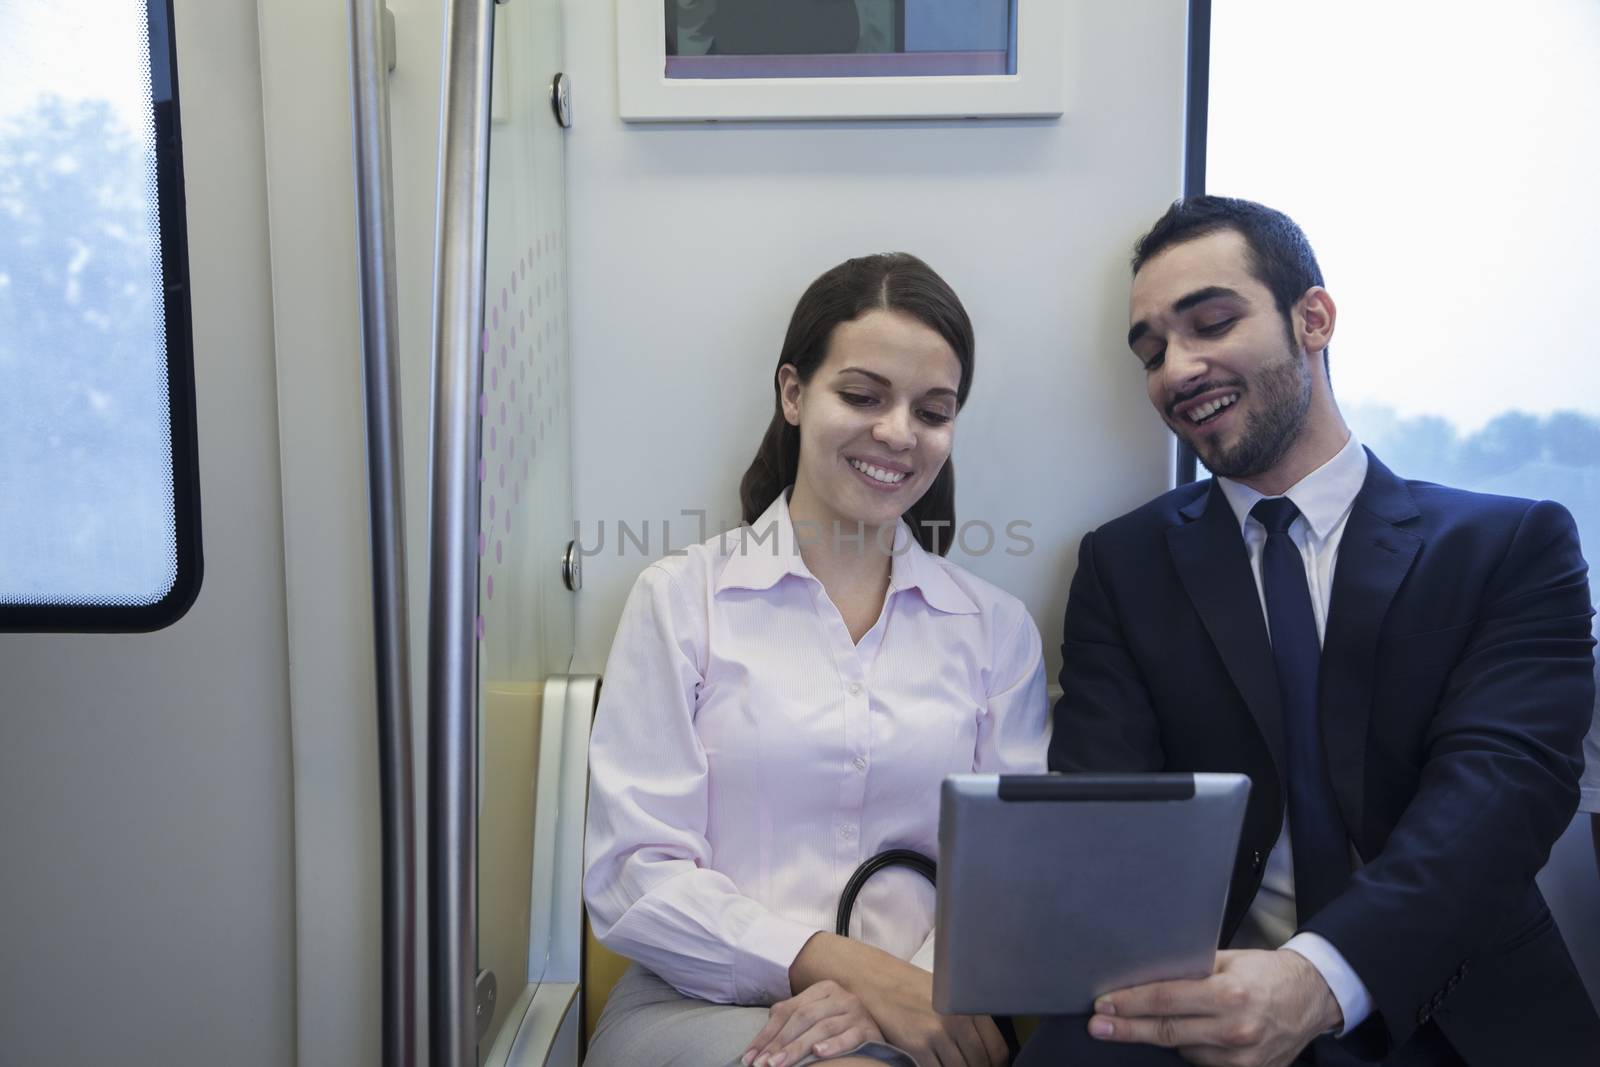 Two young business people sitting and looking at a digital tablet on the subway